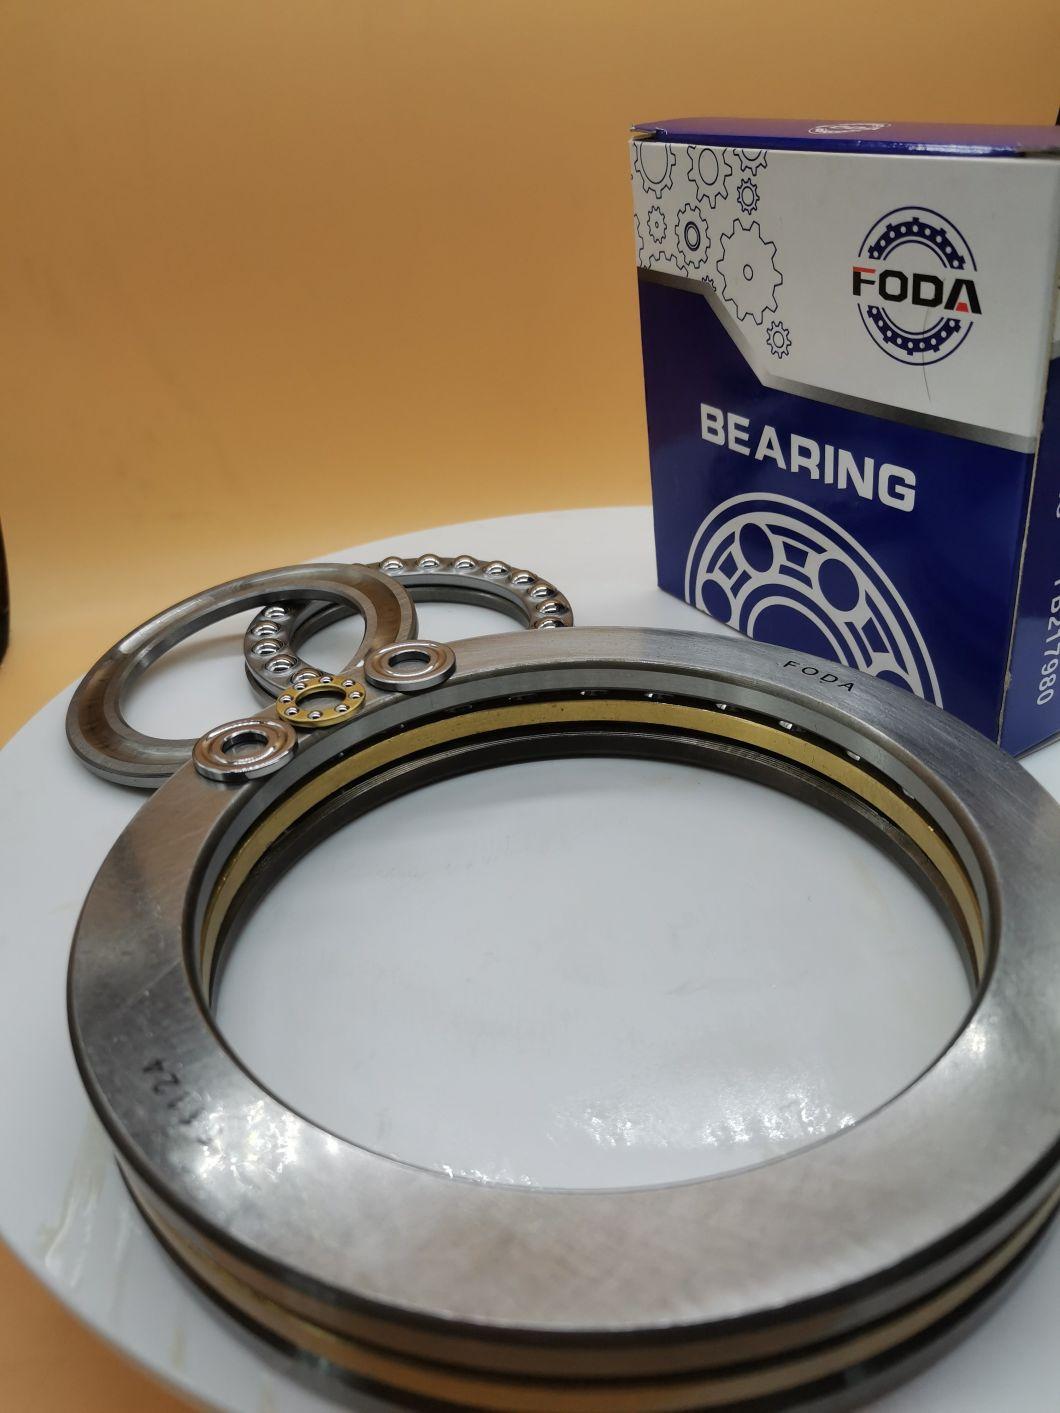 High Quality Like /Low Speed Reducer/Thrust Ball Bearings for Crane Hooks/Rolling Bearings/Thrust Ball Bearings for Jacks/ Thrust Ball Bearings of 51218